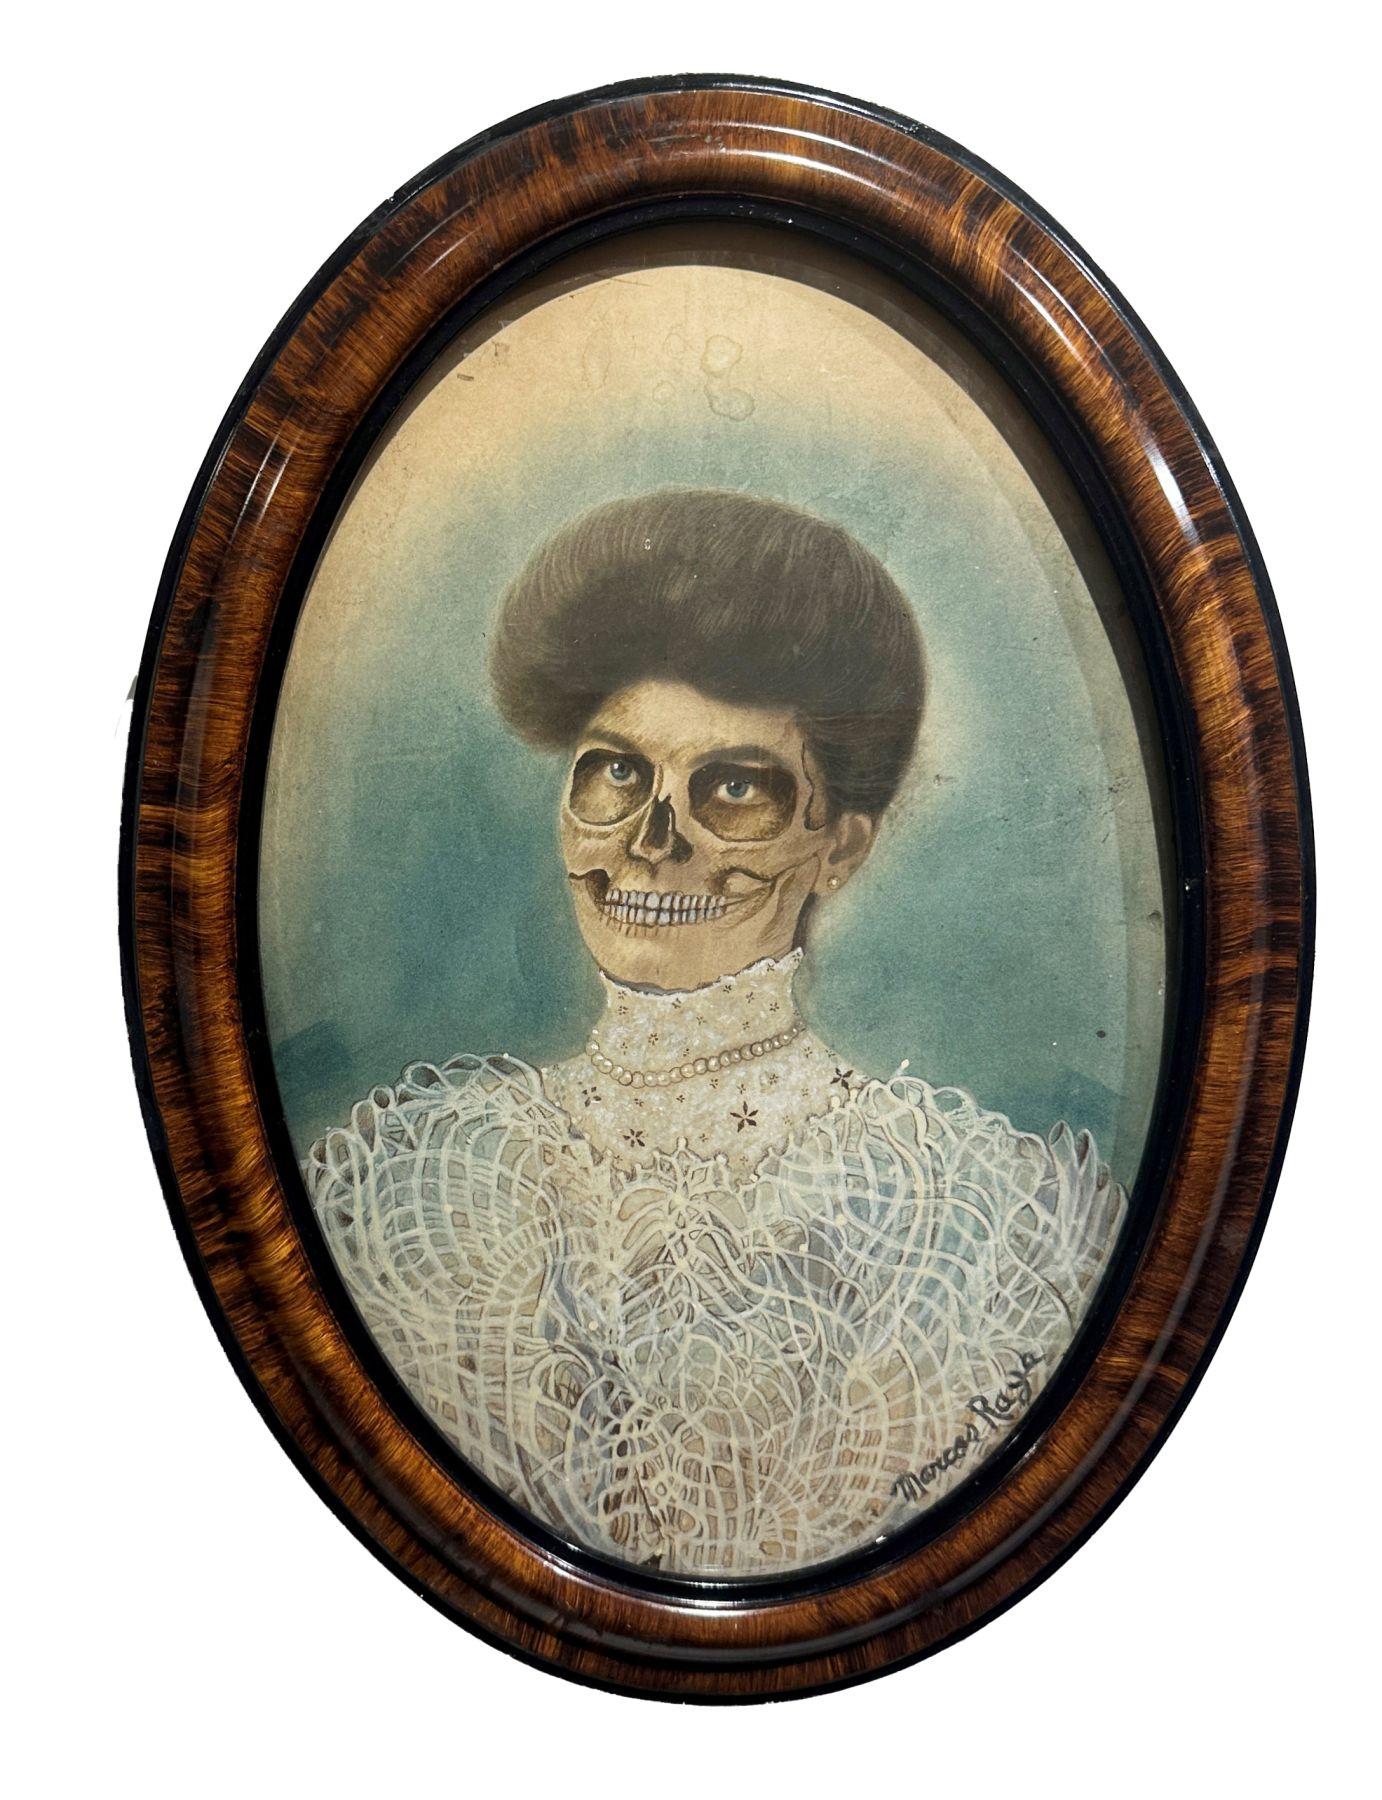 Aunt - Antique Painted and Appropriated Photograph, Original Frame - Mixed Media Art by Marcos Raya